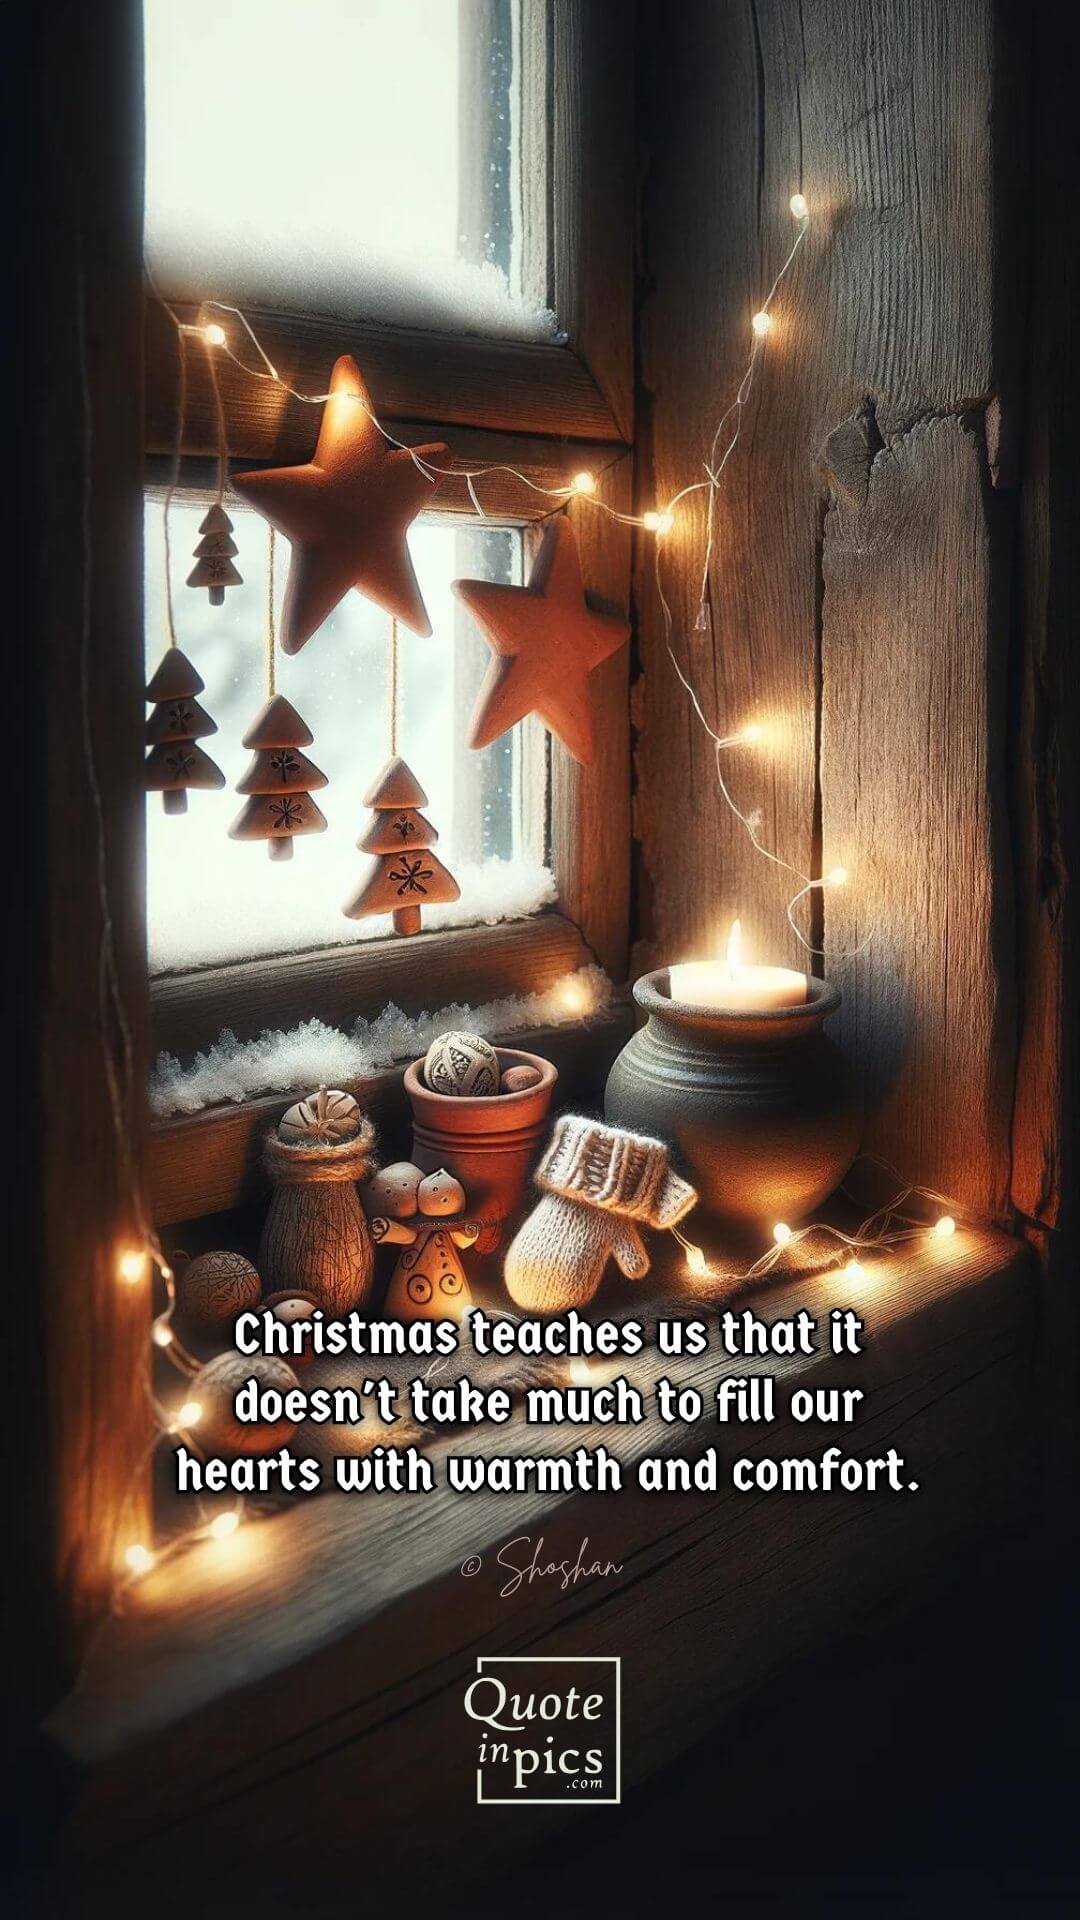 Christmas teaches us that it doesn't take much to fill our hearts with warmth and comfort